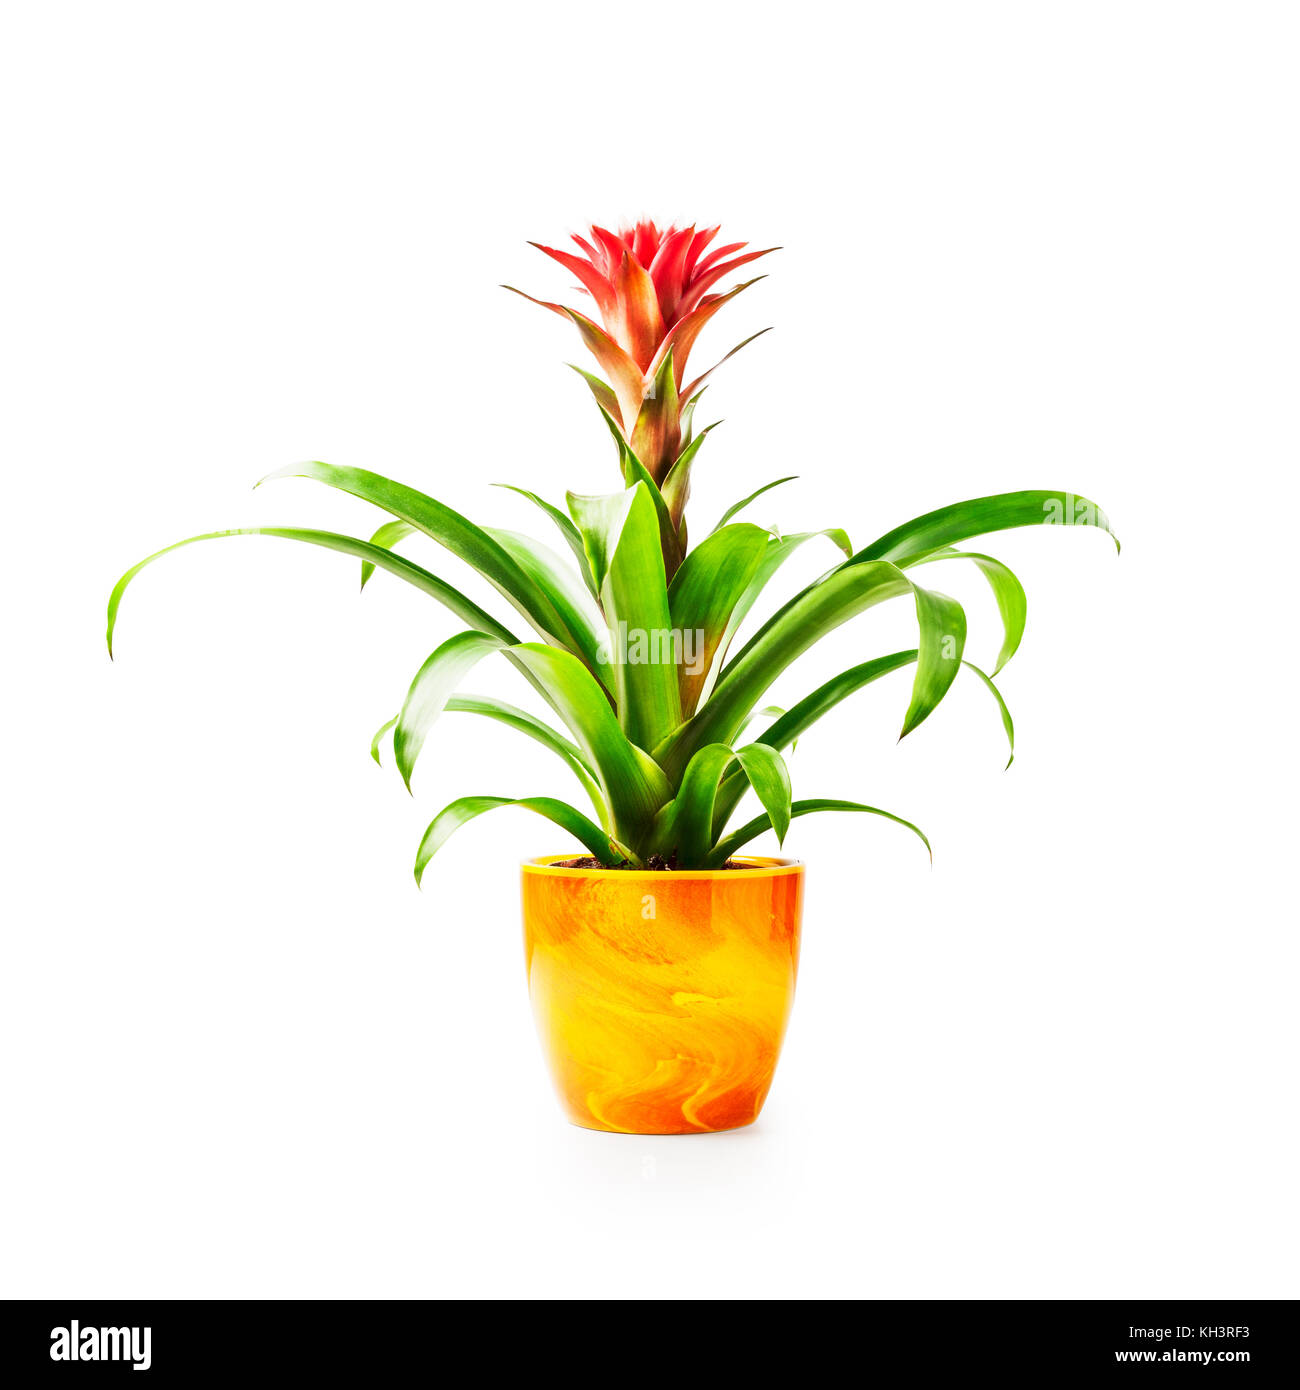 Red guzmania houseplant in flower pot isolated on white background clipping path included Stock Photo